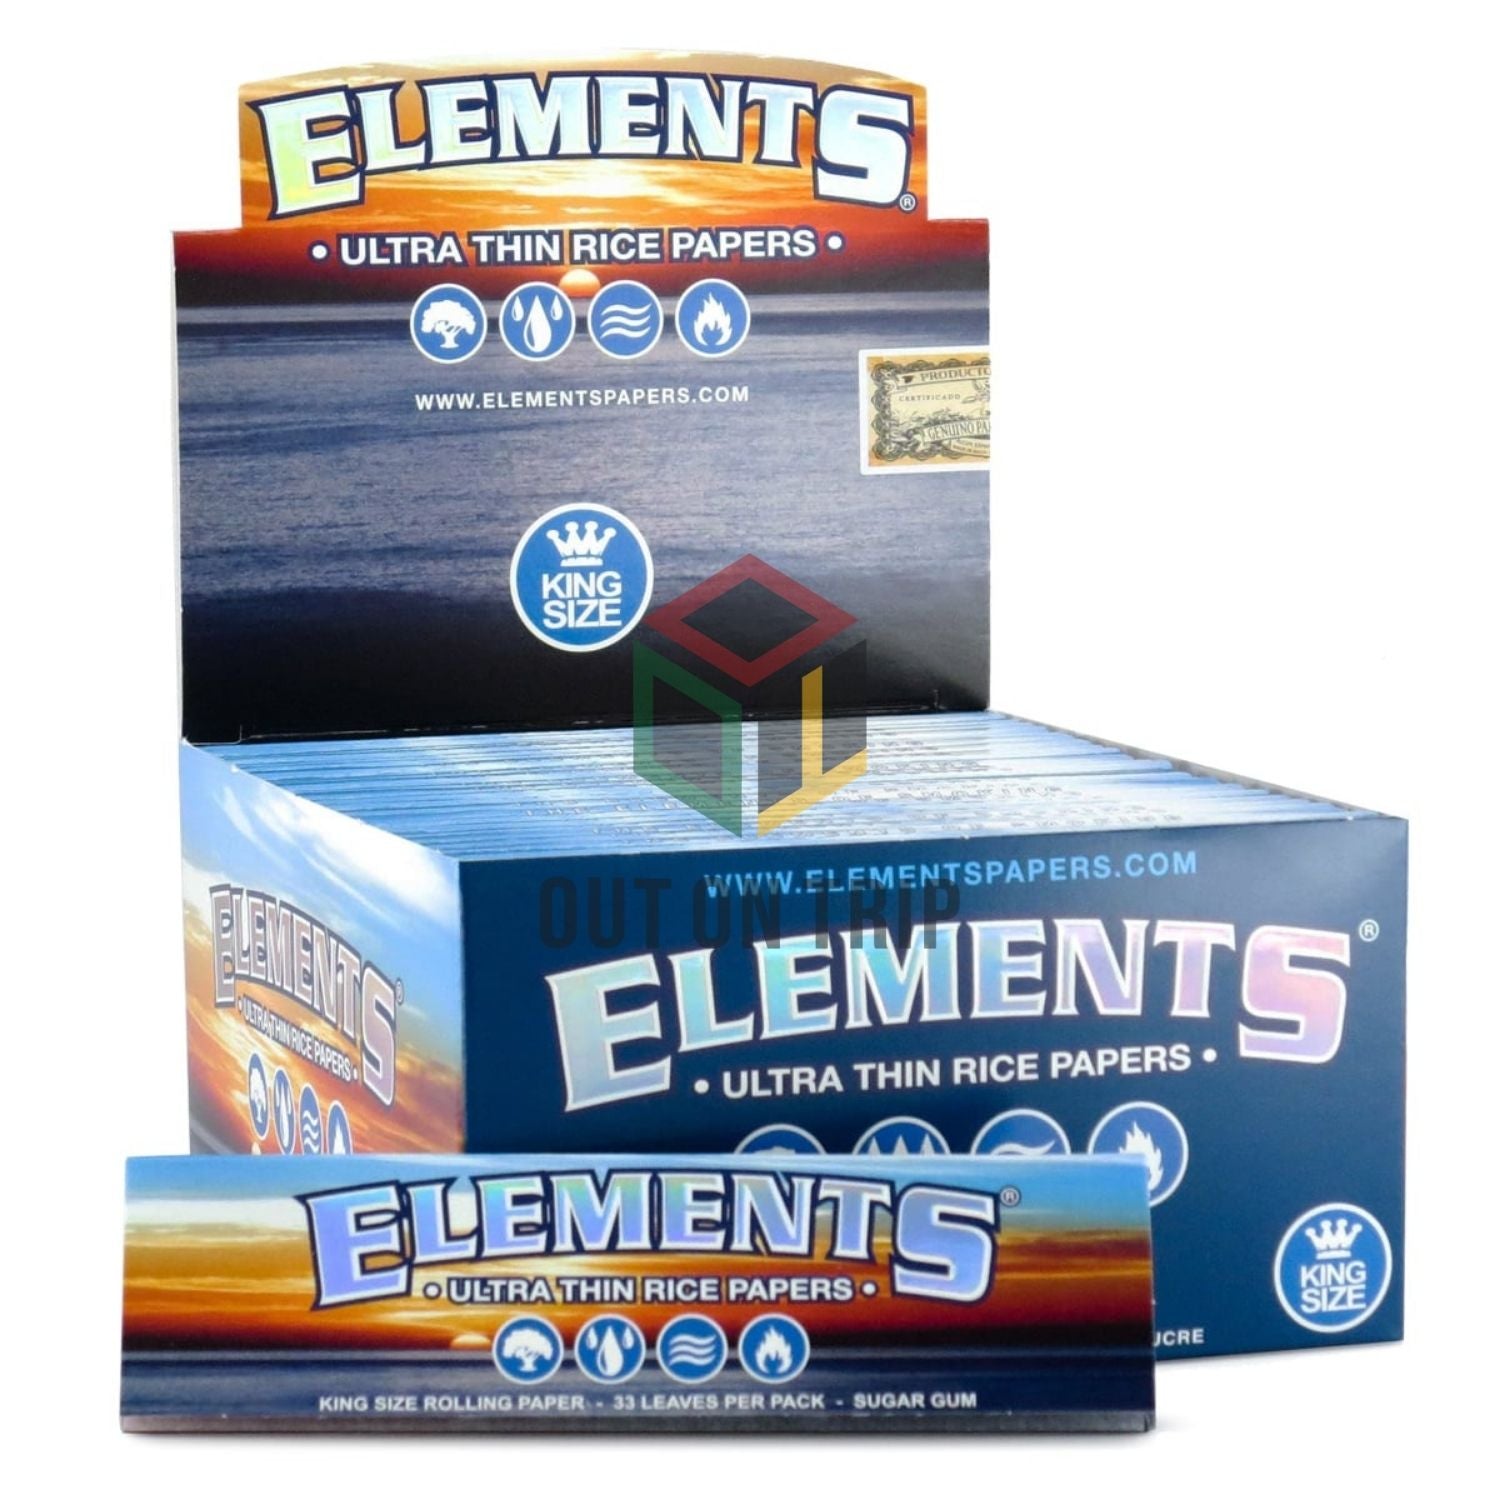 ELEMENTS Rolling Paper King Size Slim Box